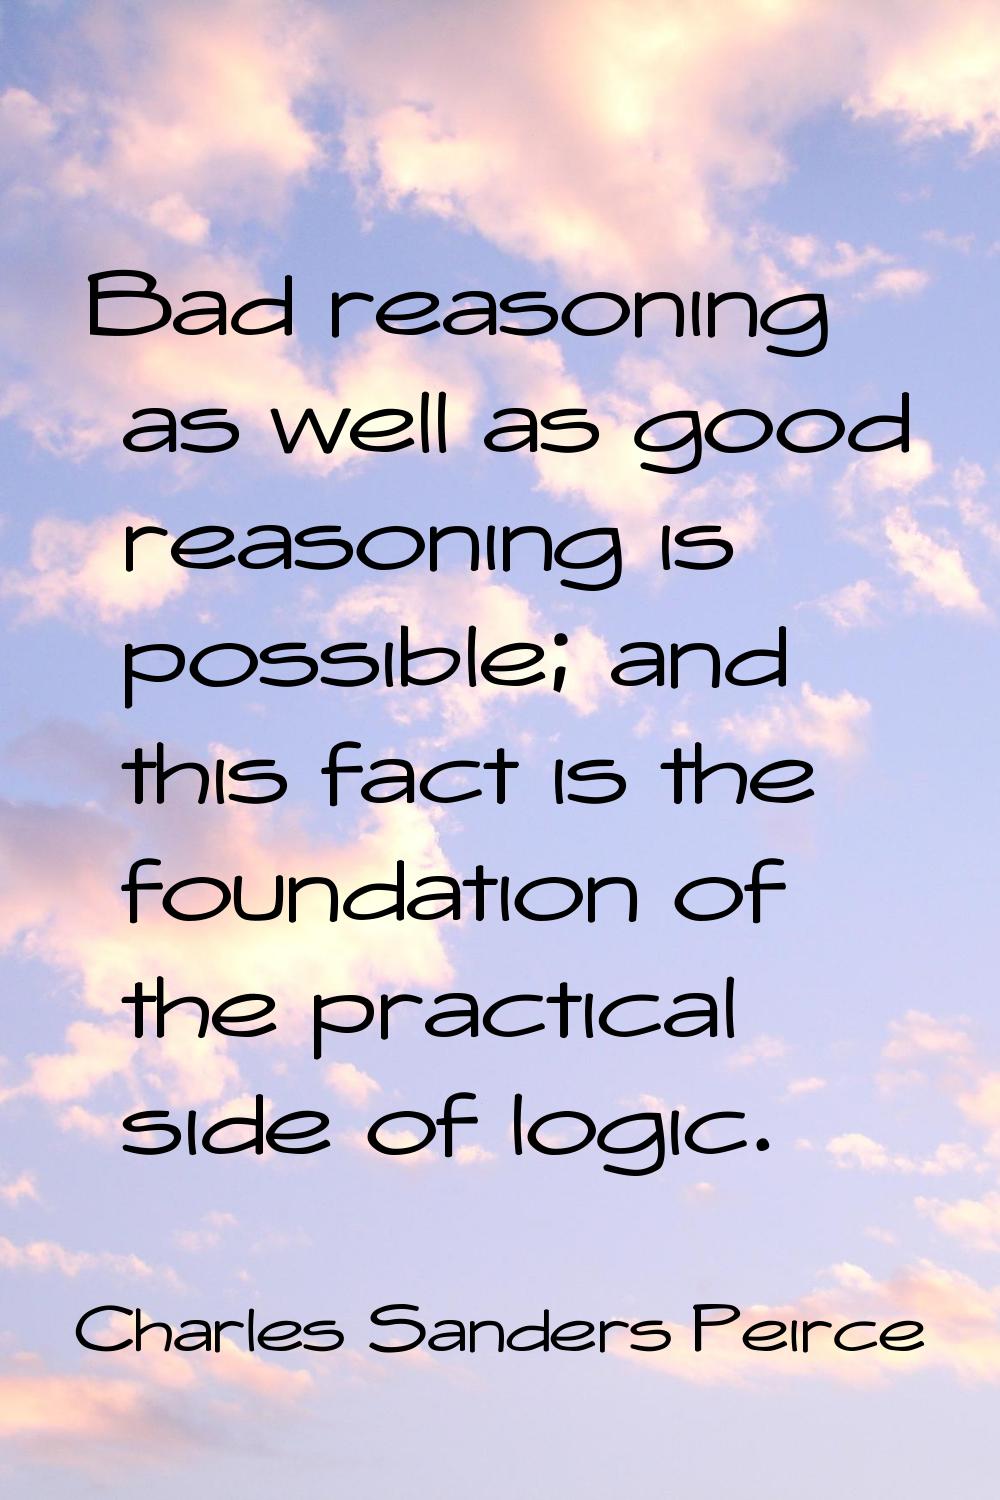 Bad reasoning as well as good reasoning is possible; and this fact is the foundation of the practic